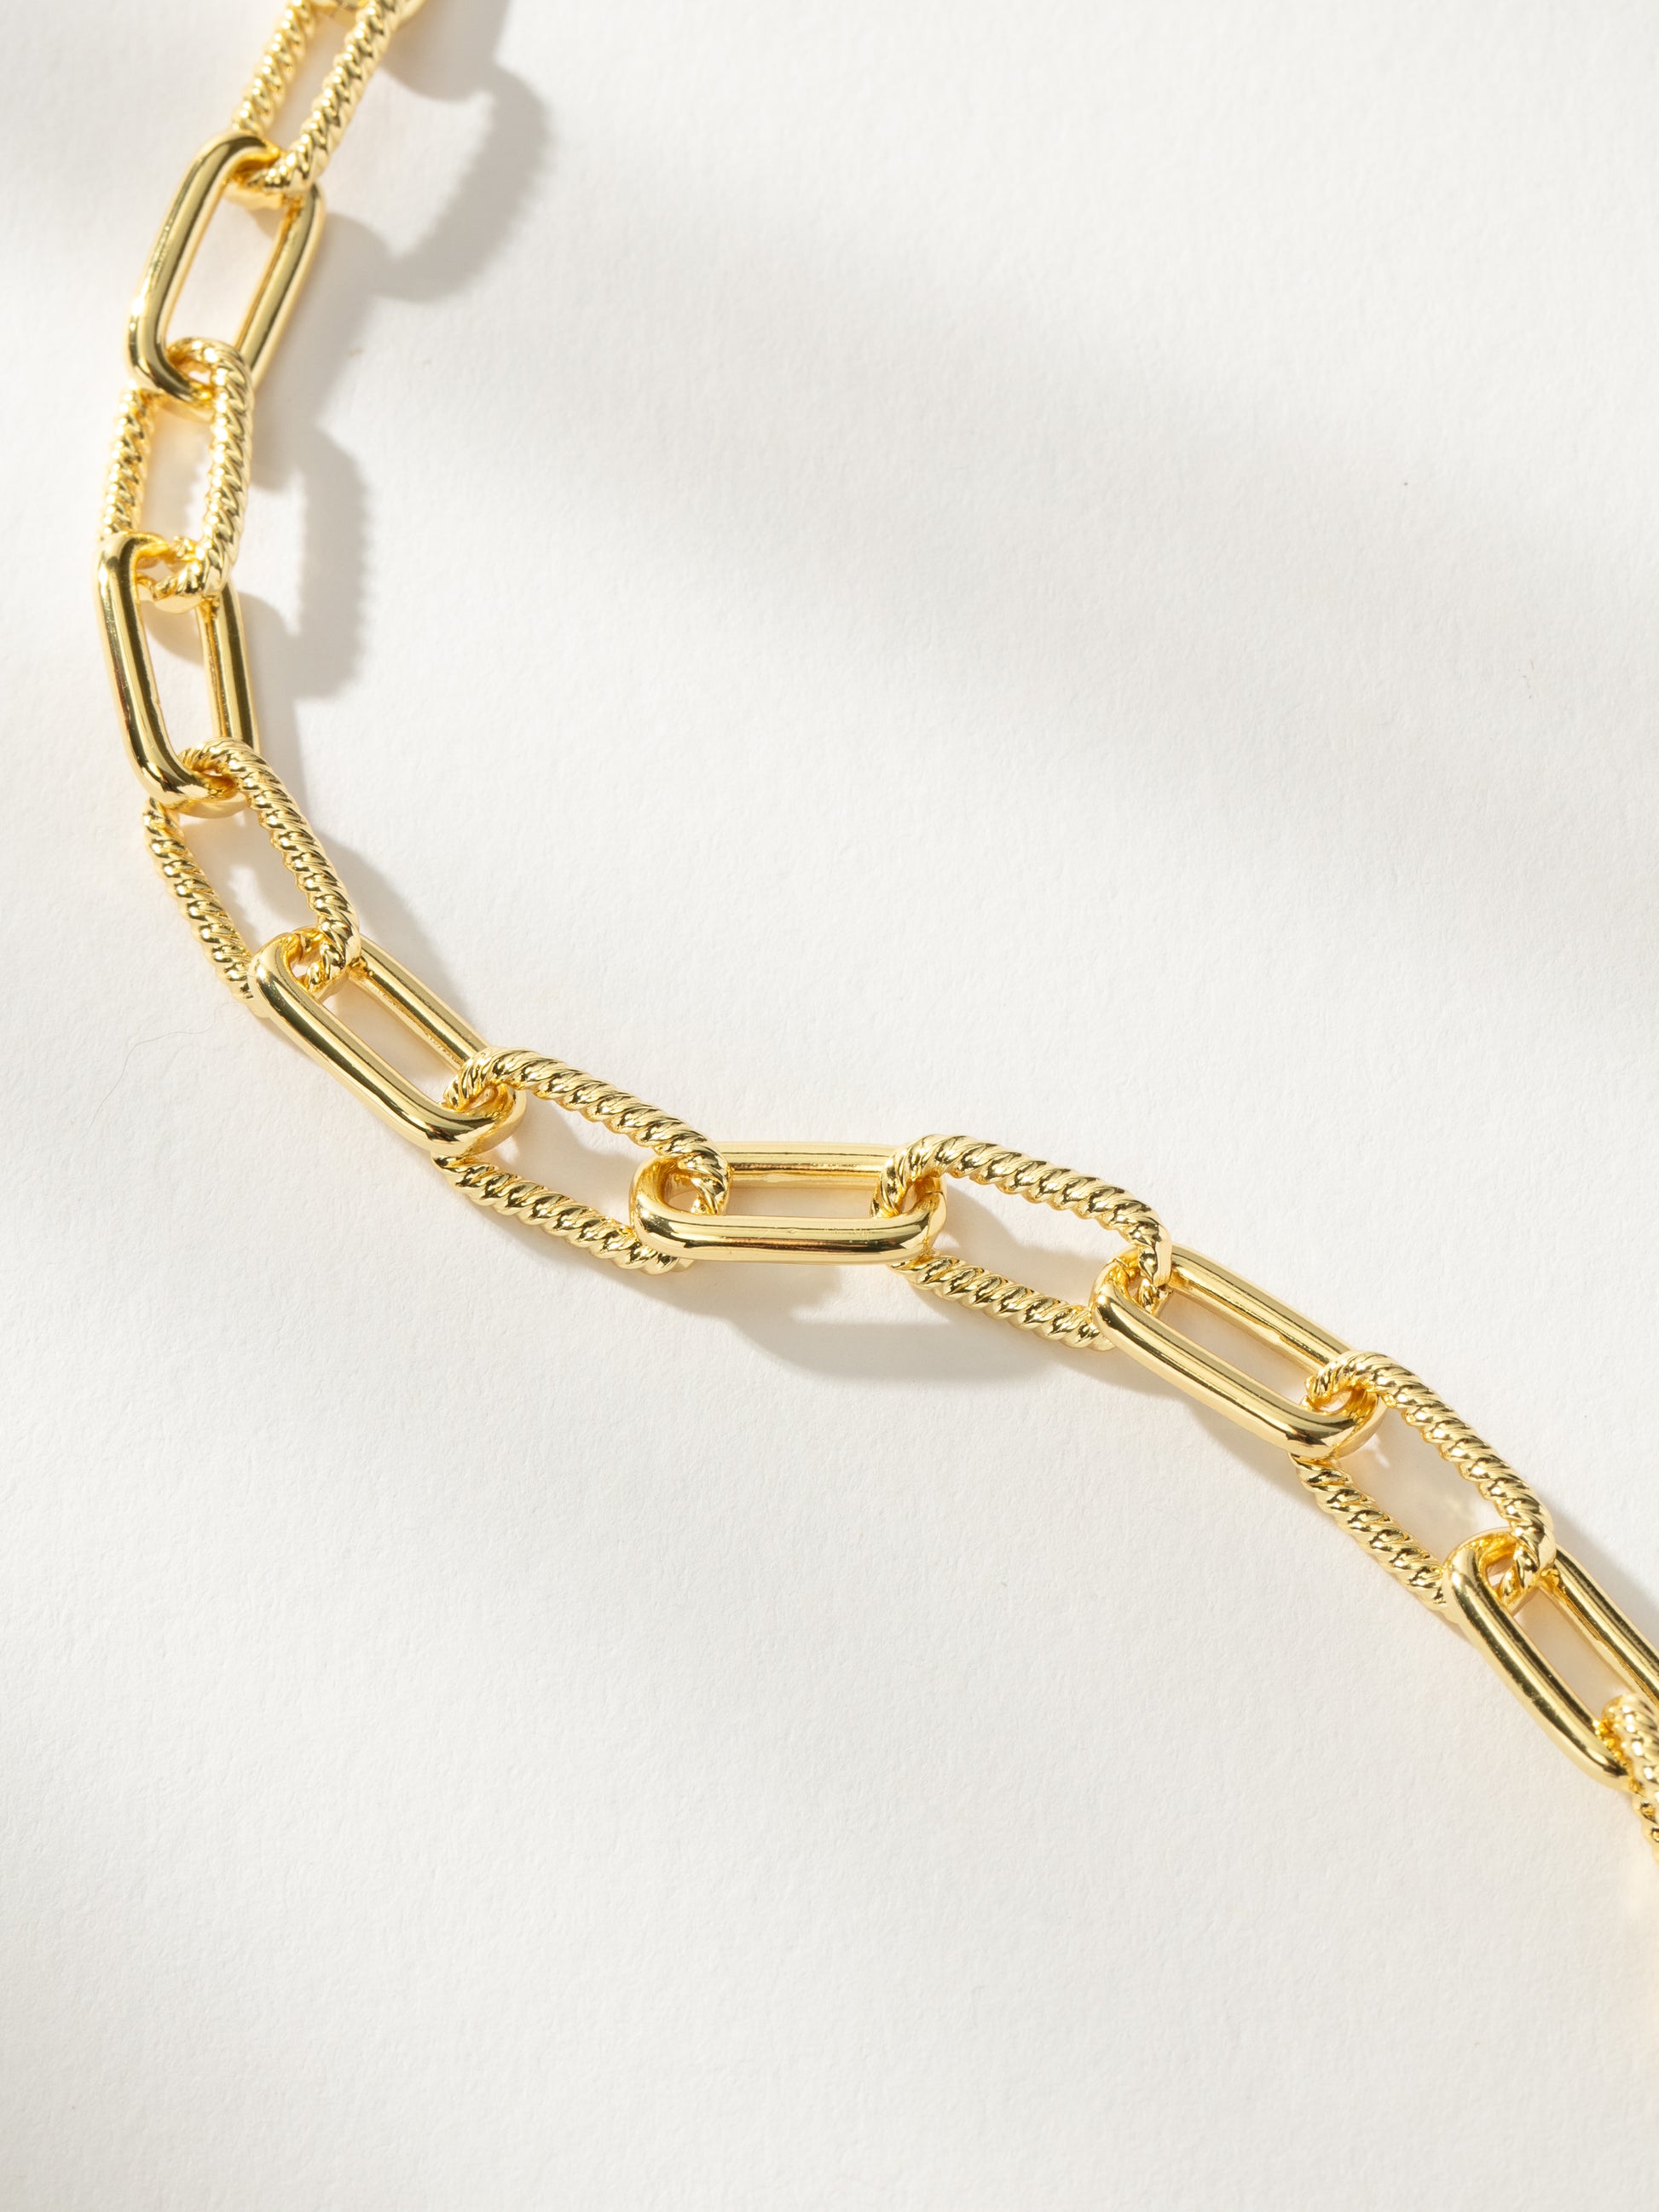 Linked Chain Bracelet | Gold | Product Detail Image | Uncommon James